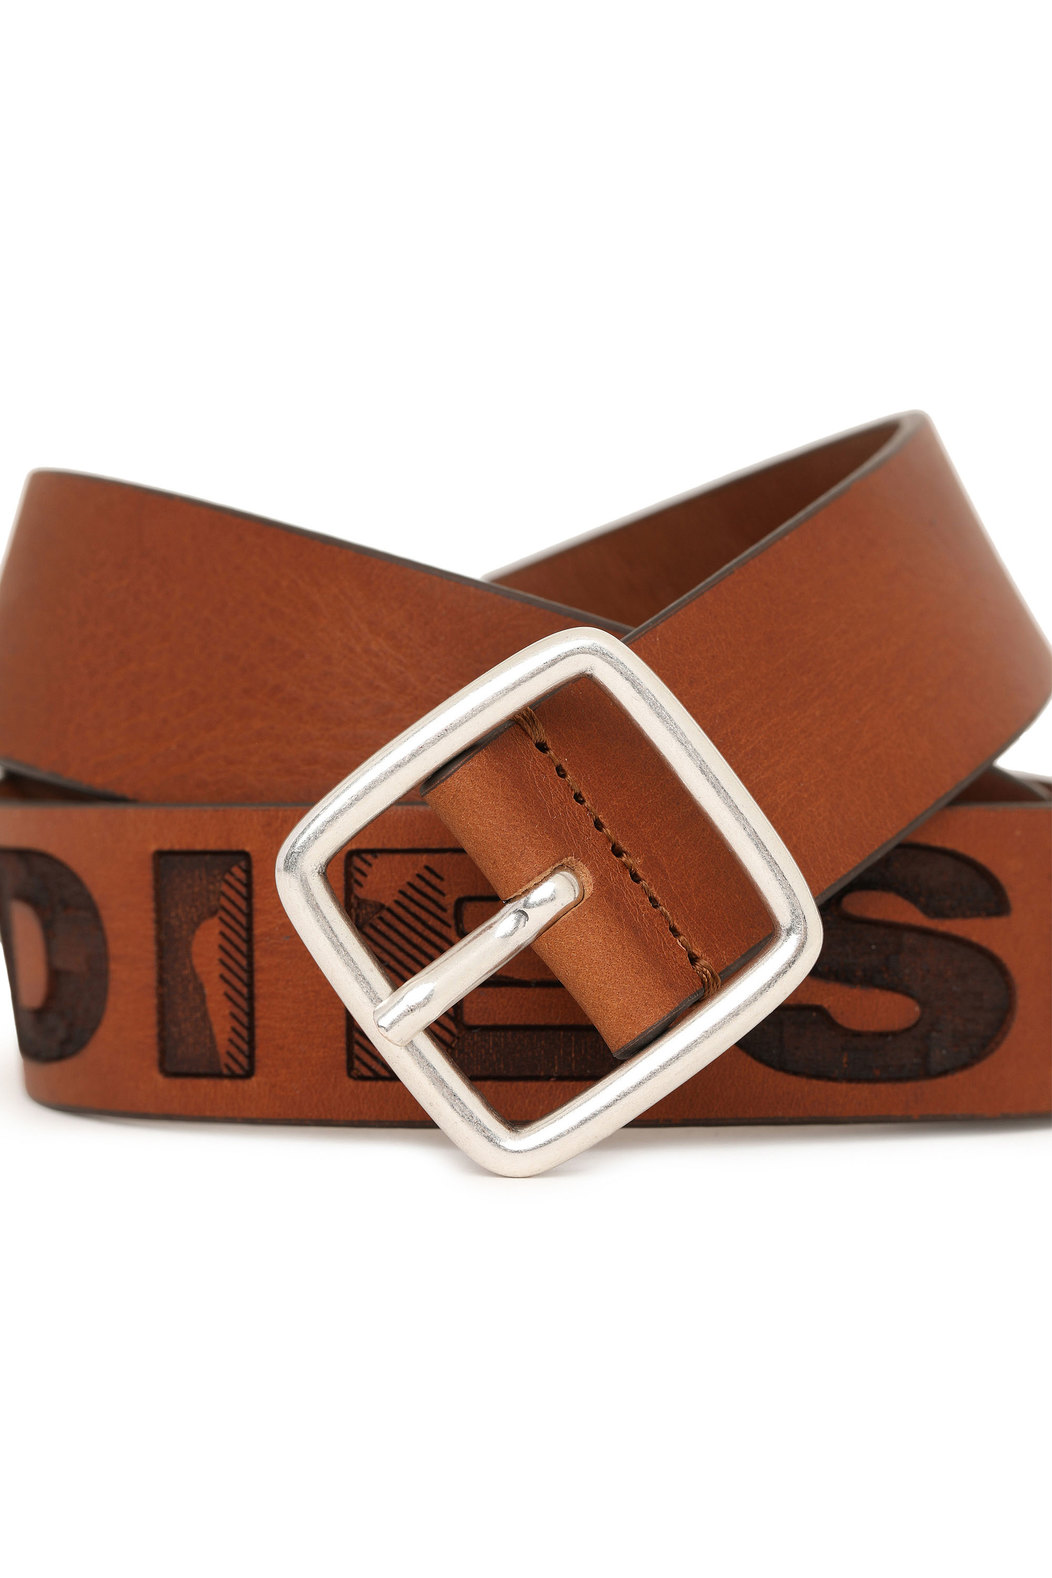 Leather belt with camo logo